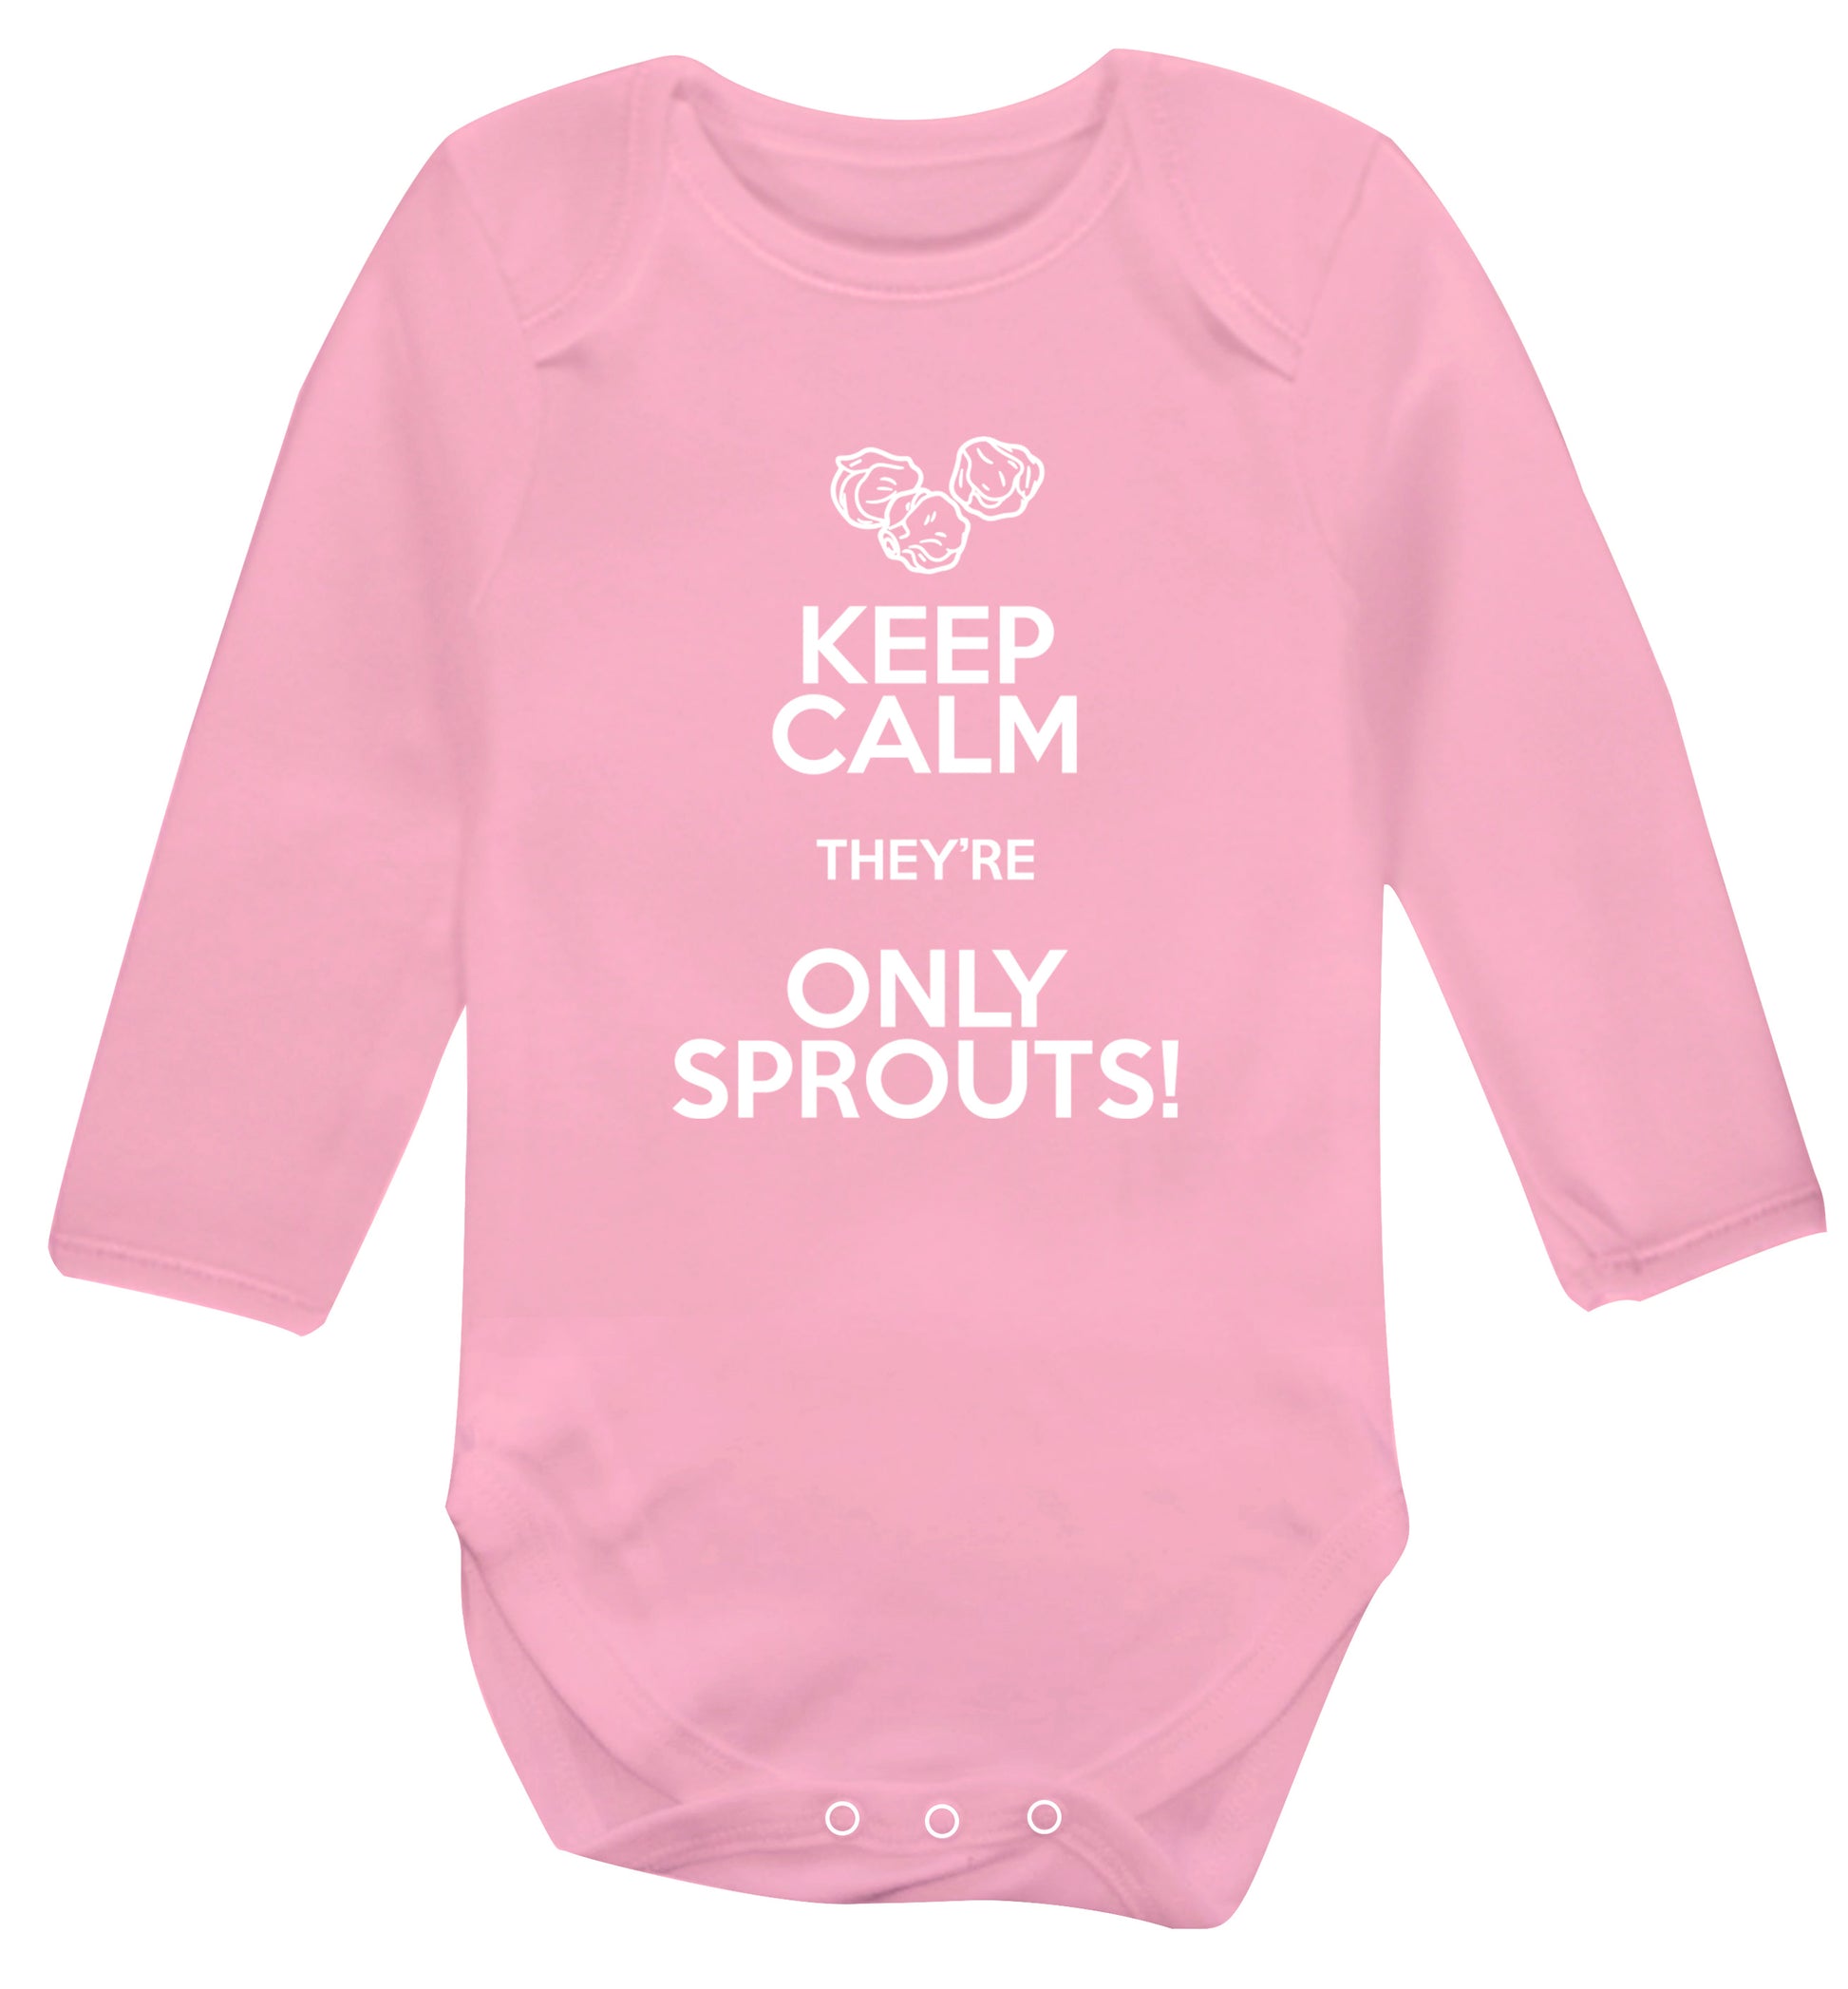 Keep calm they're only sprouts Baby Vest long sleeved pale pink 6-12 months